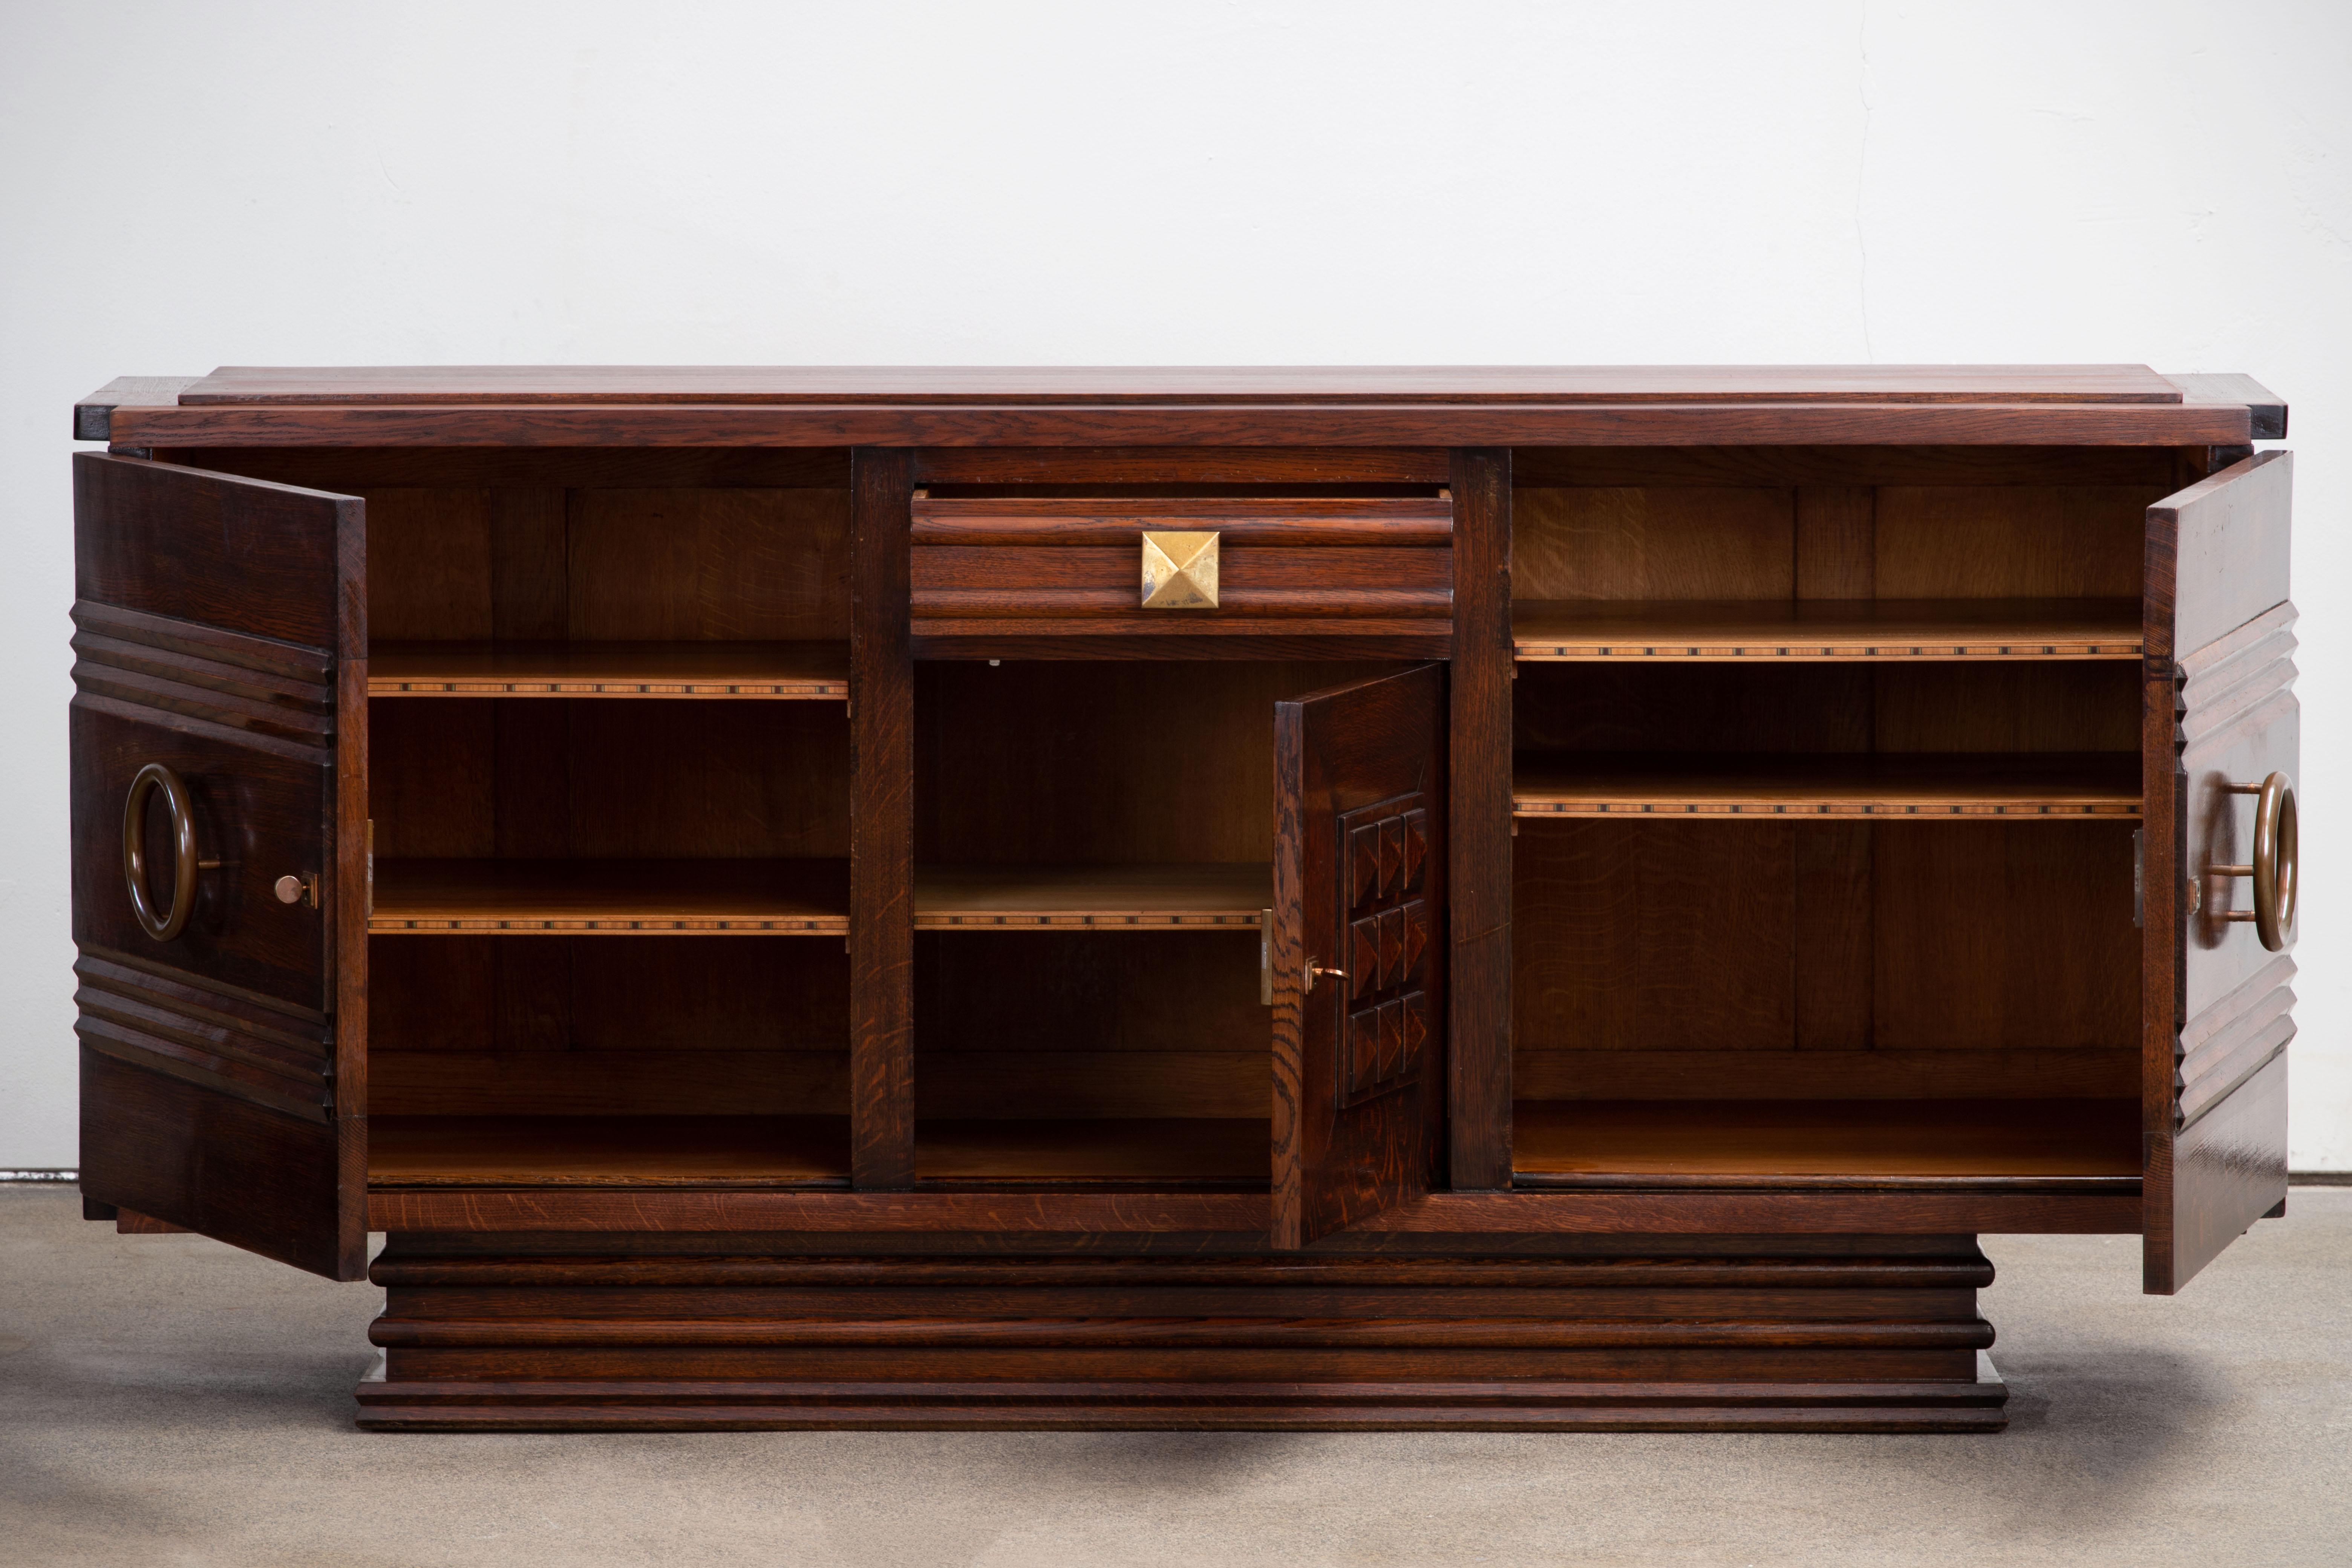 This French Brutalist Art Deco Buffet / Cabinet / Vitrine in solid oak was created in the 1940s by Gaston Poisson. 
It is in the town of Dunkirk, Normandy, France, that we had the chance to unearth this wonderful Brutalist piece.
We can clearly